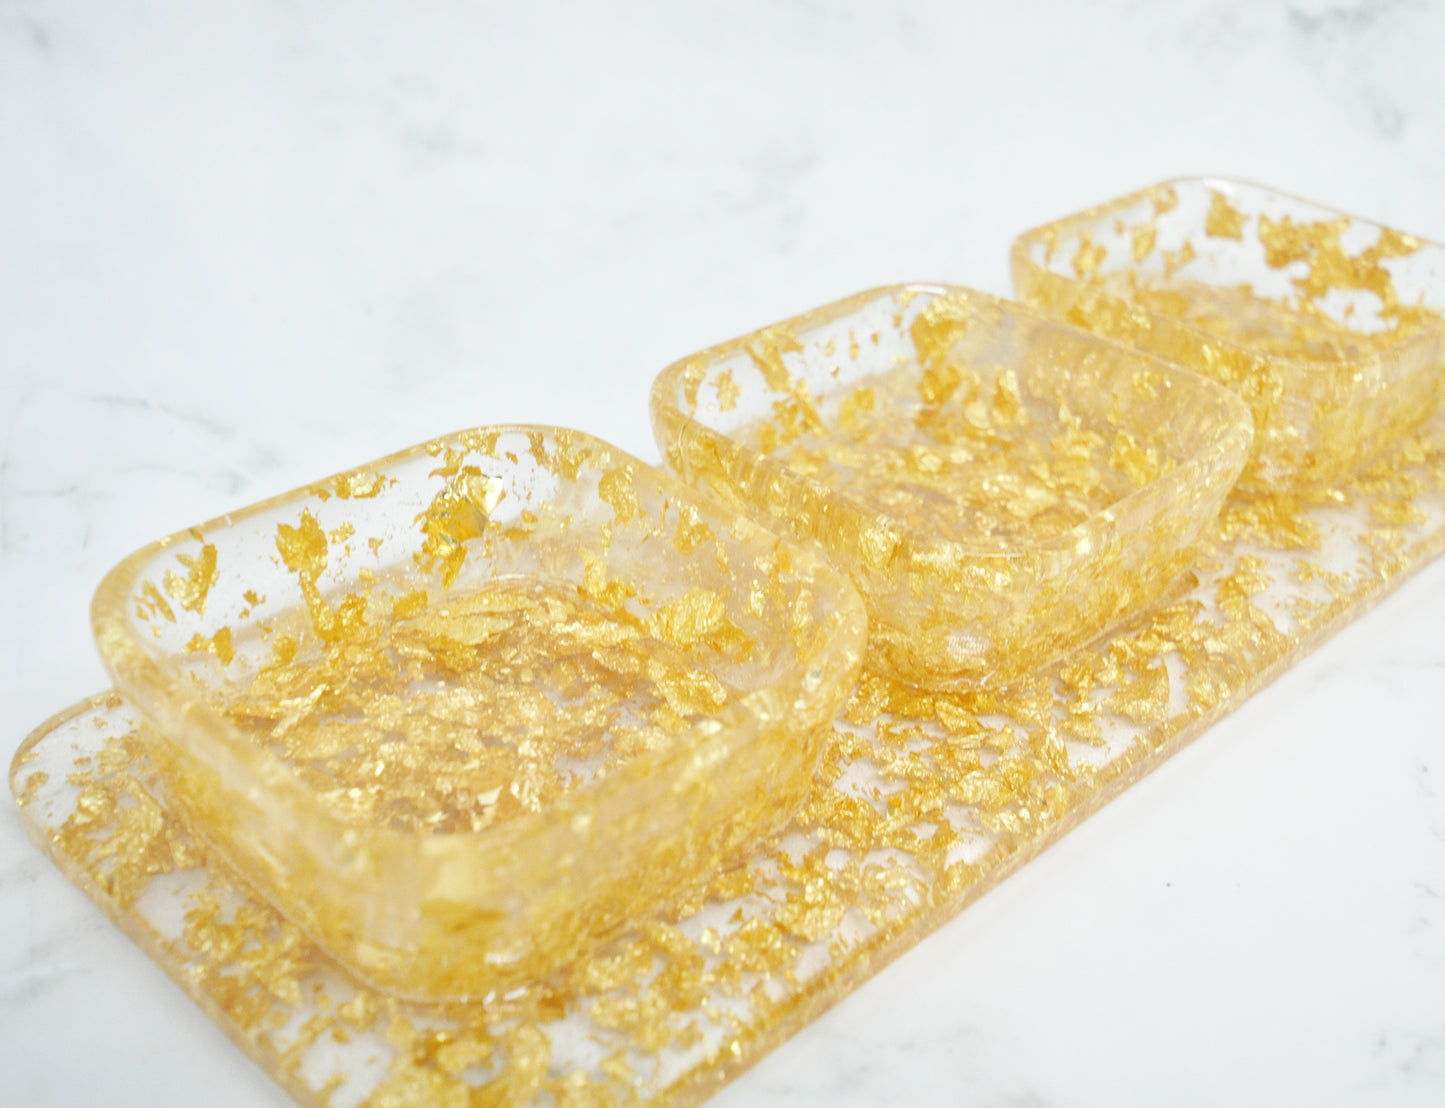 Gold Trinket Vanity Tray - The perfect accessory to any room.